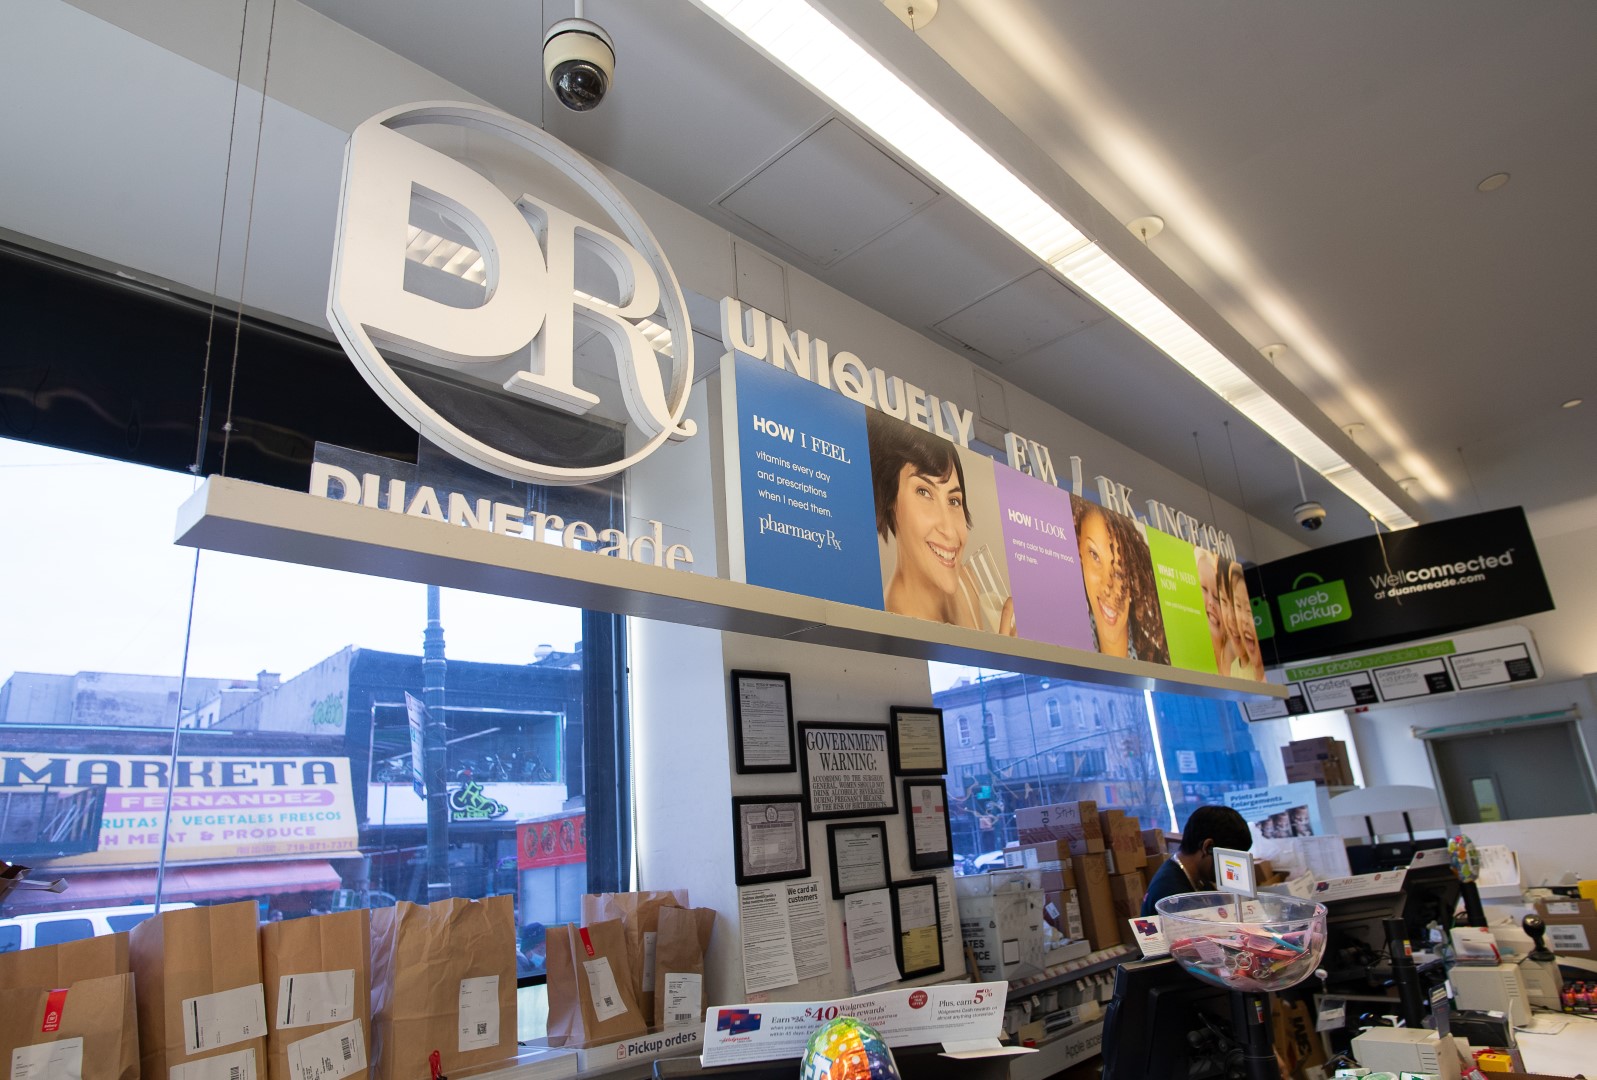 Interior view of a duane reade store showing promotional banners, a visible logo, and a checkout with several paper bags on the counter.